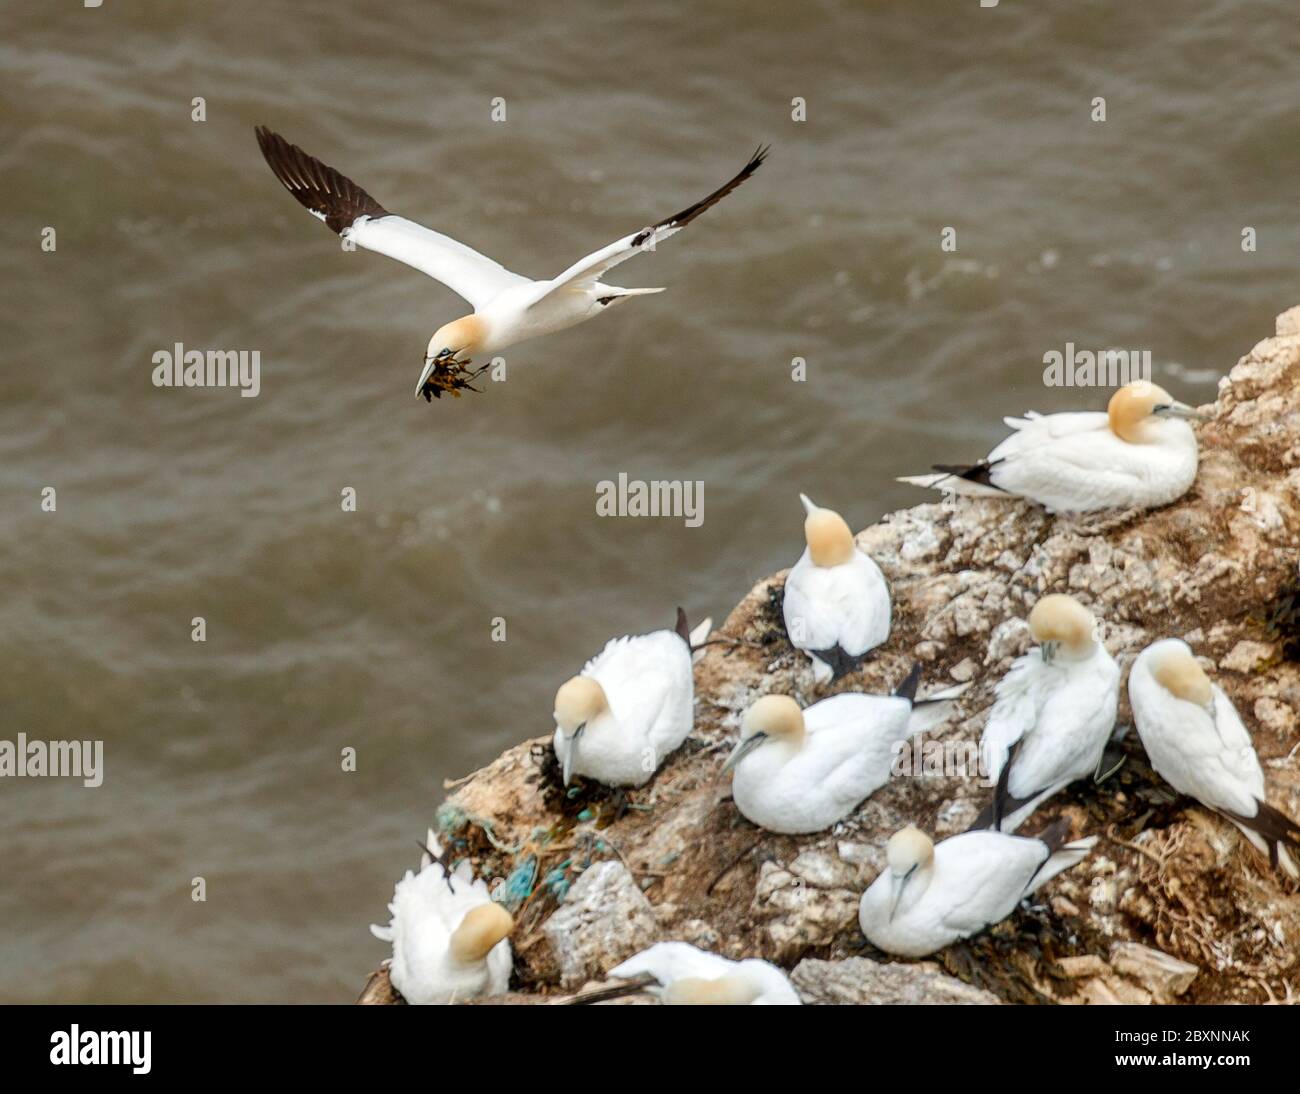 Gannets nest at Bempton Cliffs in Yorkshire, as over 250,000 seabirds flock to the chalk cliffs to find a mate and raise their young. From April to August the cliffs come alive with nest-building adults and young chicks. Stock Photo